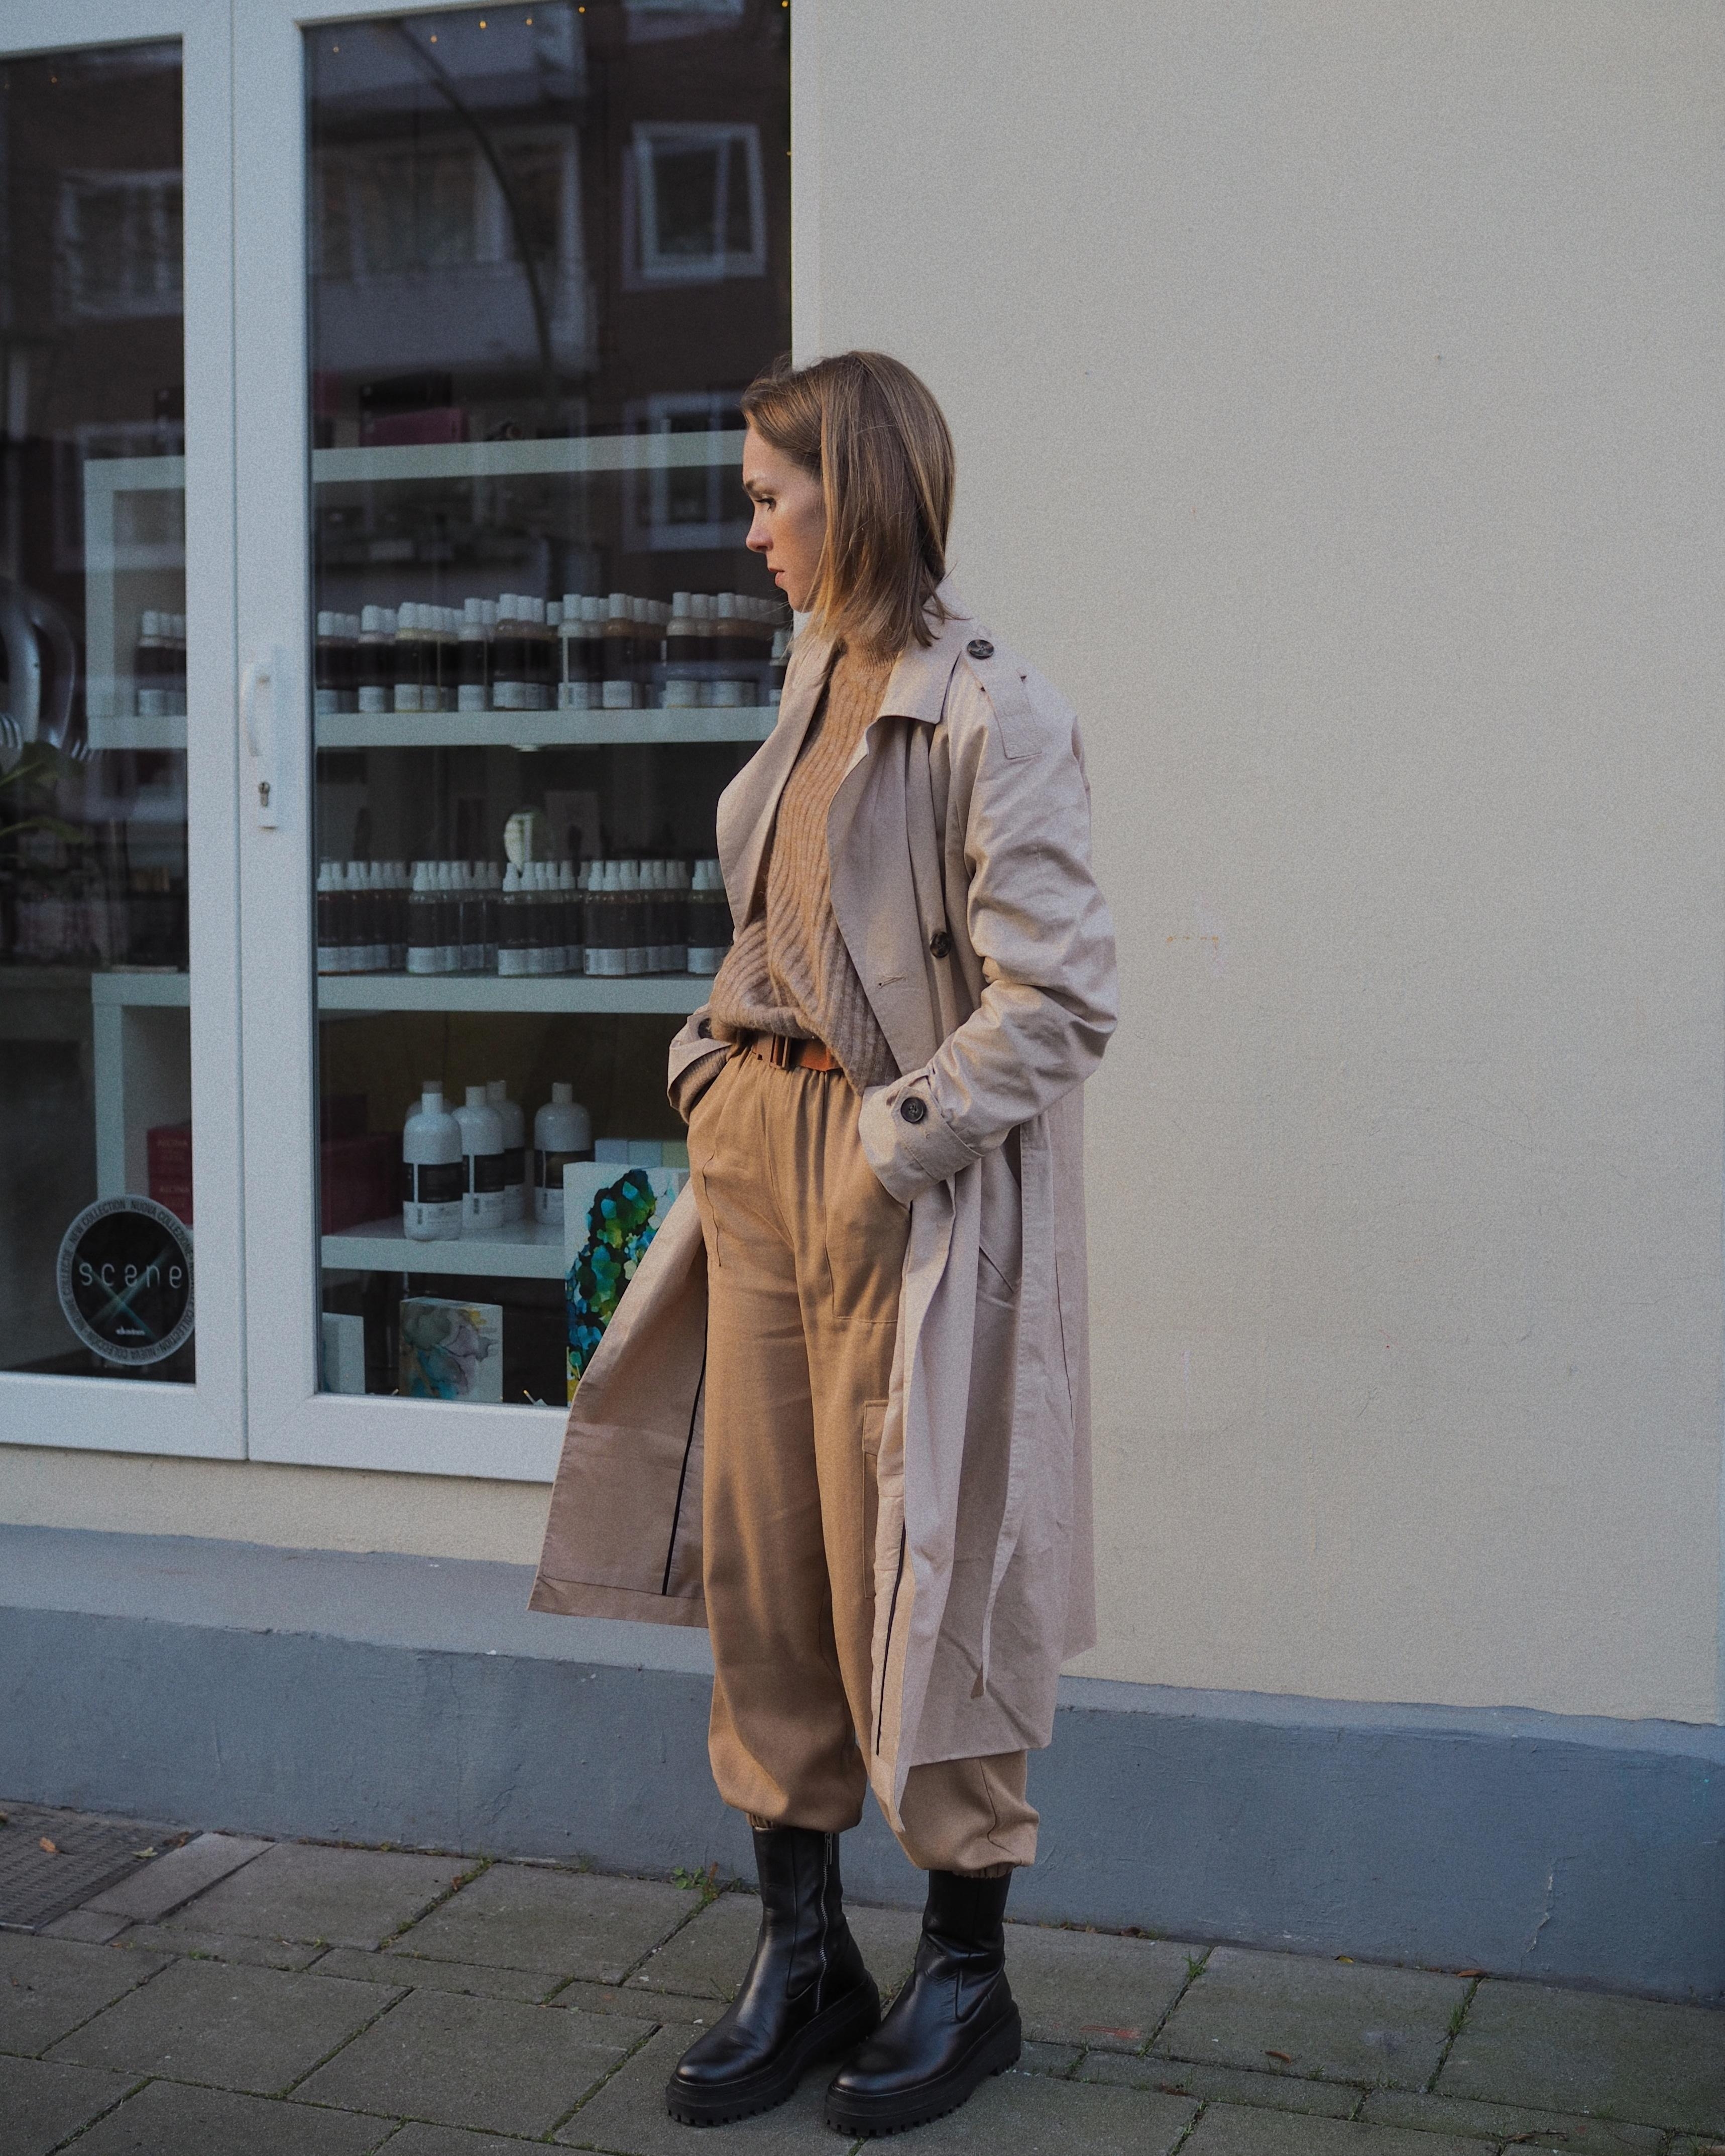 Neutrals 🦋 #fashion #streetstyle #fashioncrush #trenchcoat #boots #baggypants 